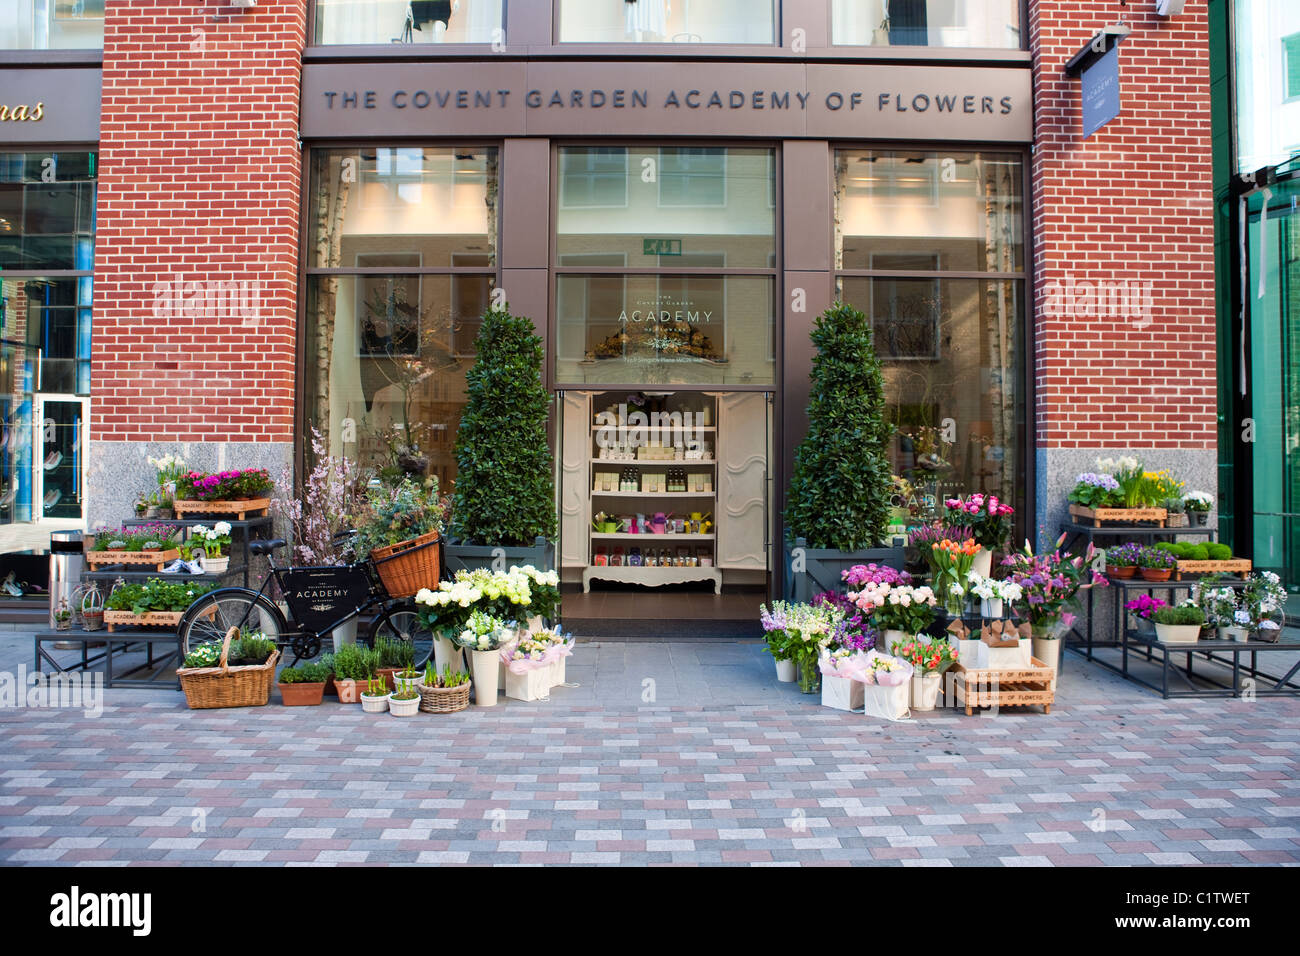 the covent garden academy of flowers, a flower shop and school stock